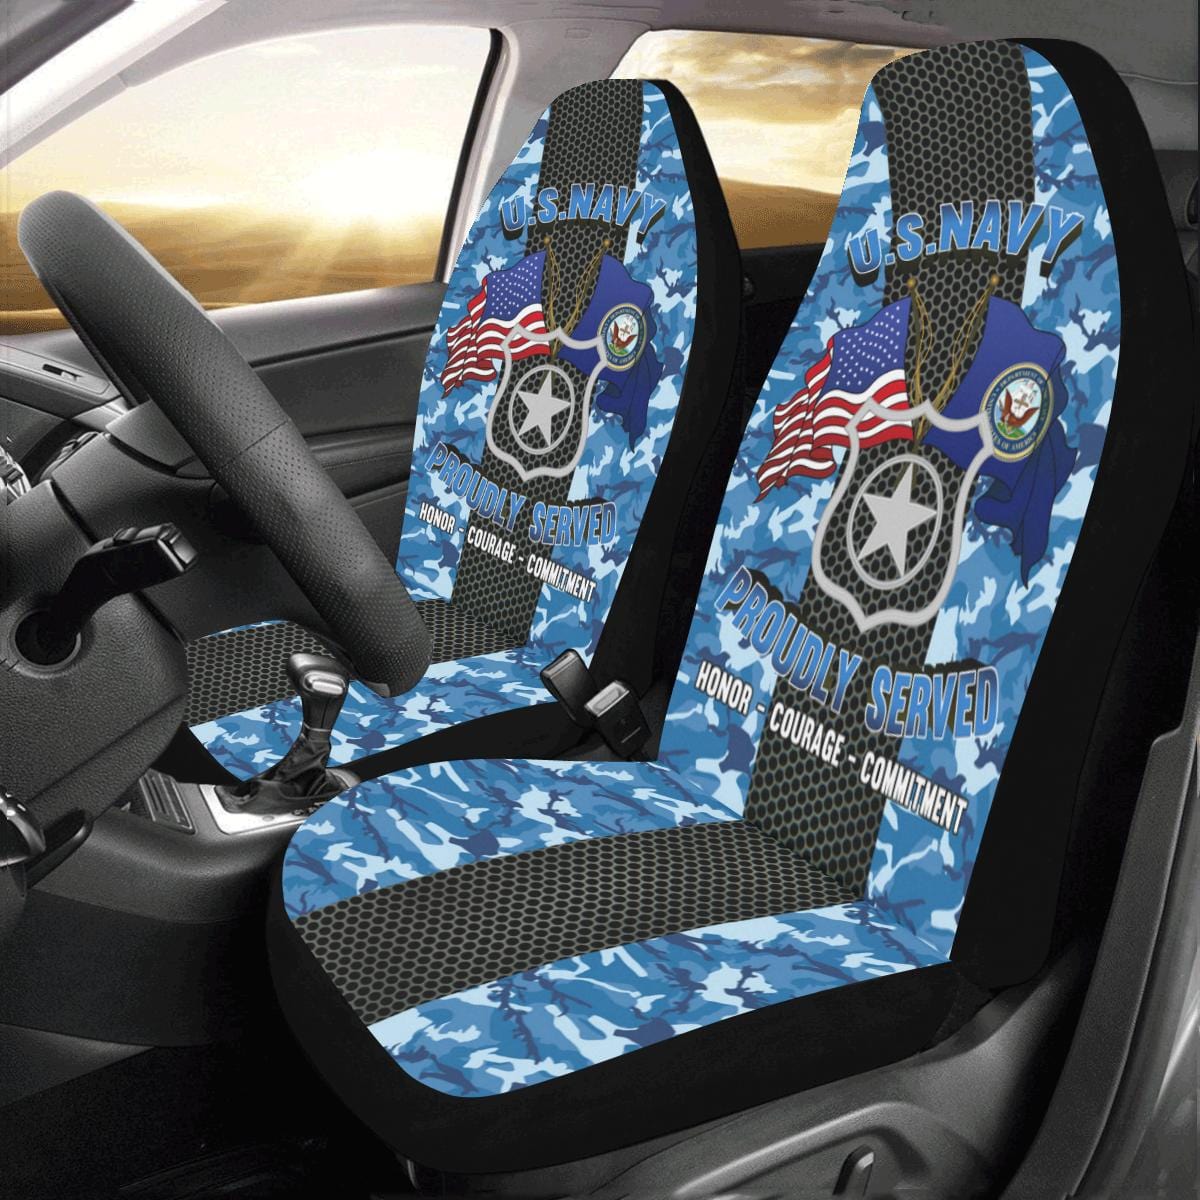 U.S Navy Master-at-arms Navy MA Car Seat Covers (Set of 2)-SeatCovers-Navy-Rate-Veterans Nation